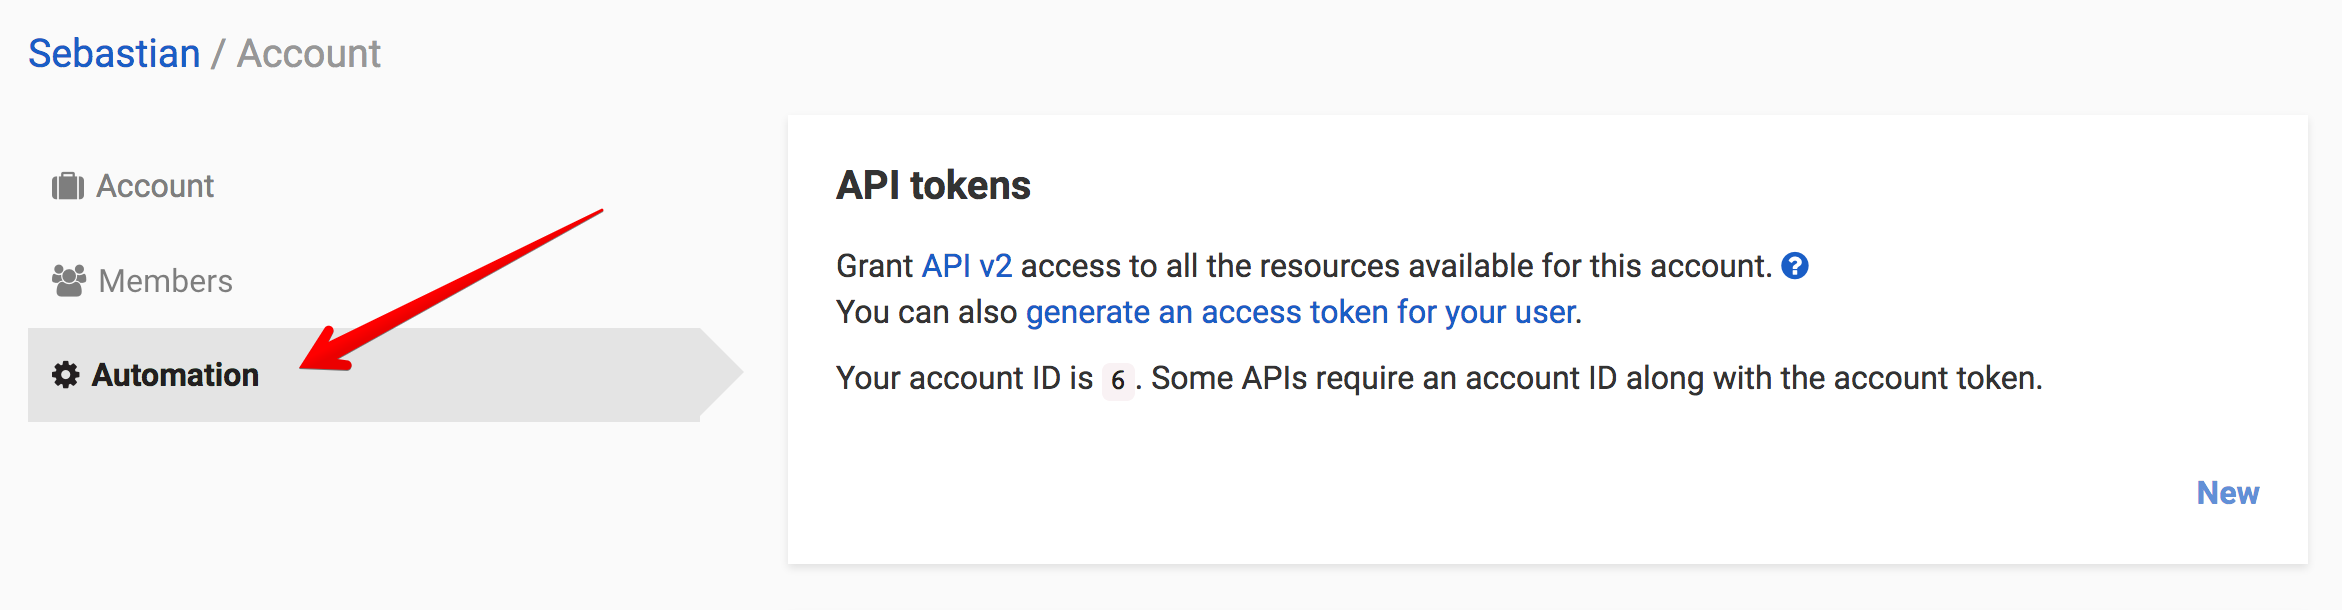 Access Tokens Link